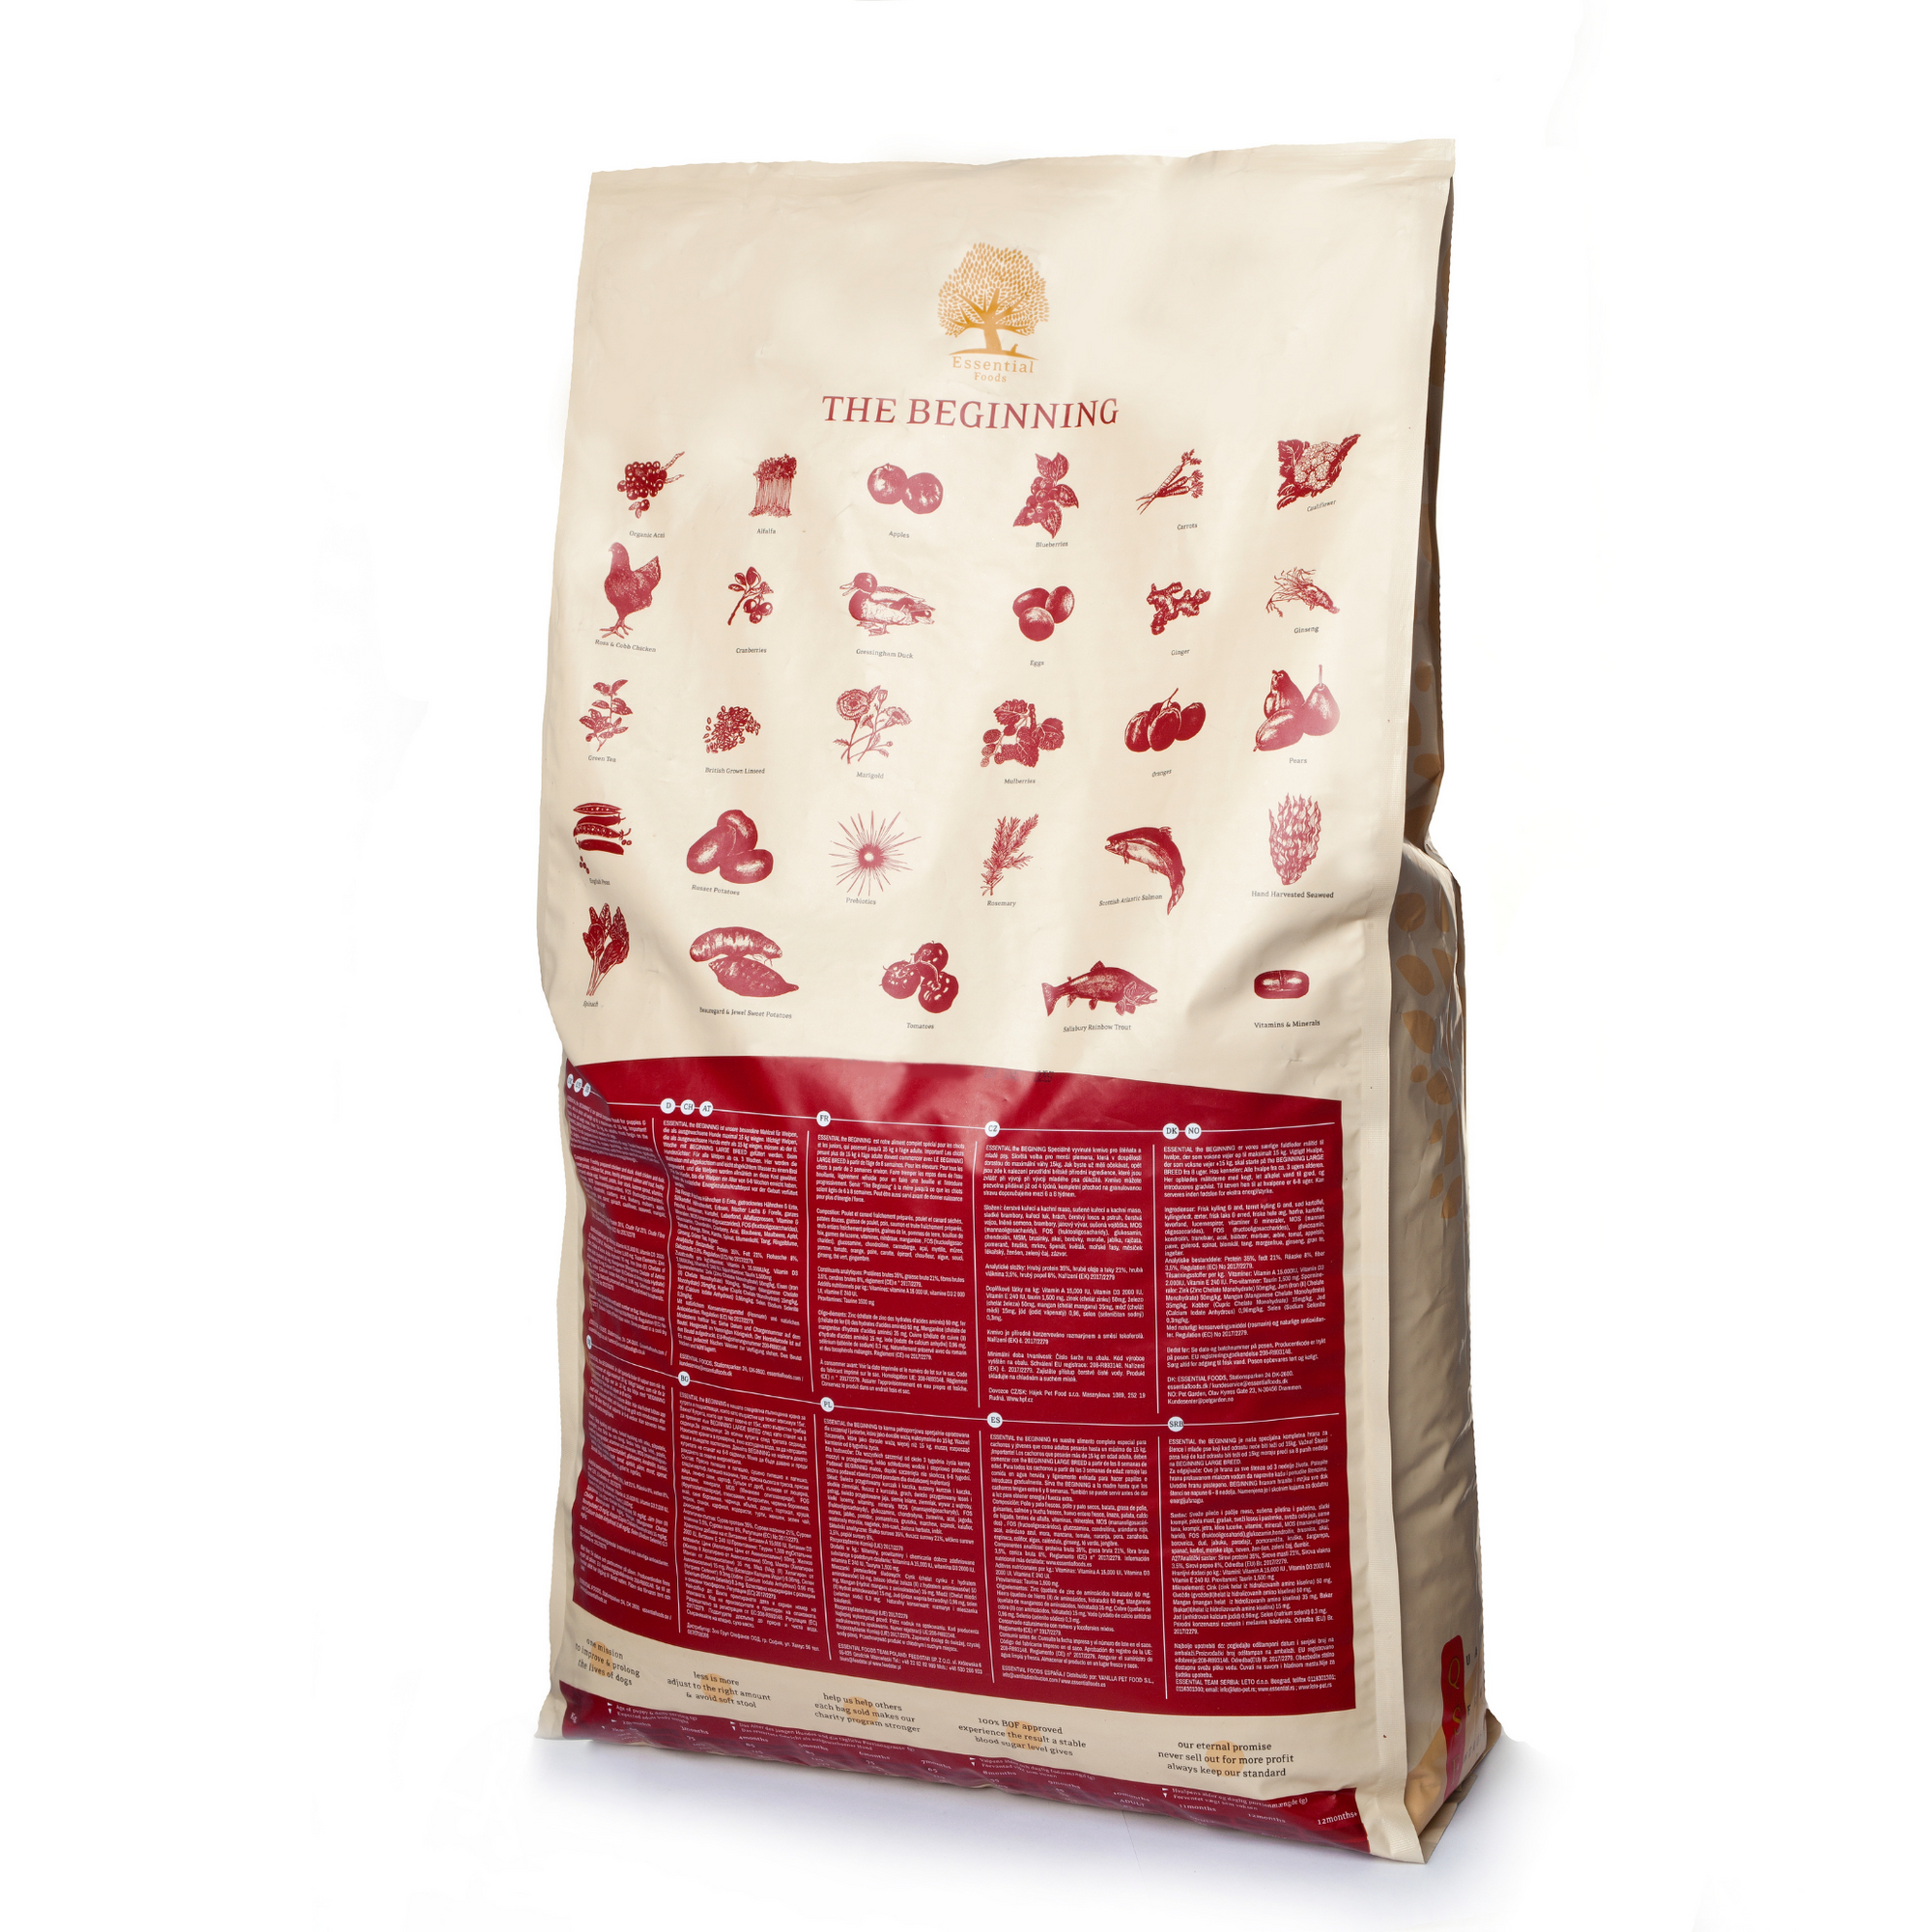 85% meat duck, chick, salmon, trout, eggs Super premium grainless feed for puppies of small breeds The BEGINNING